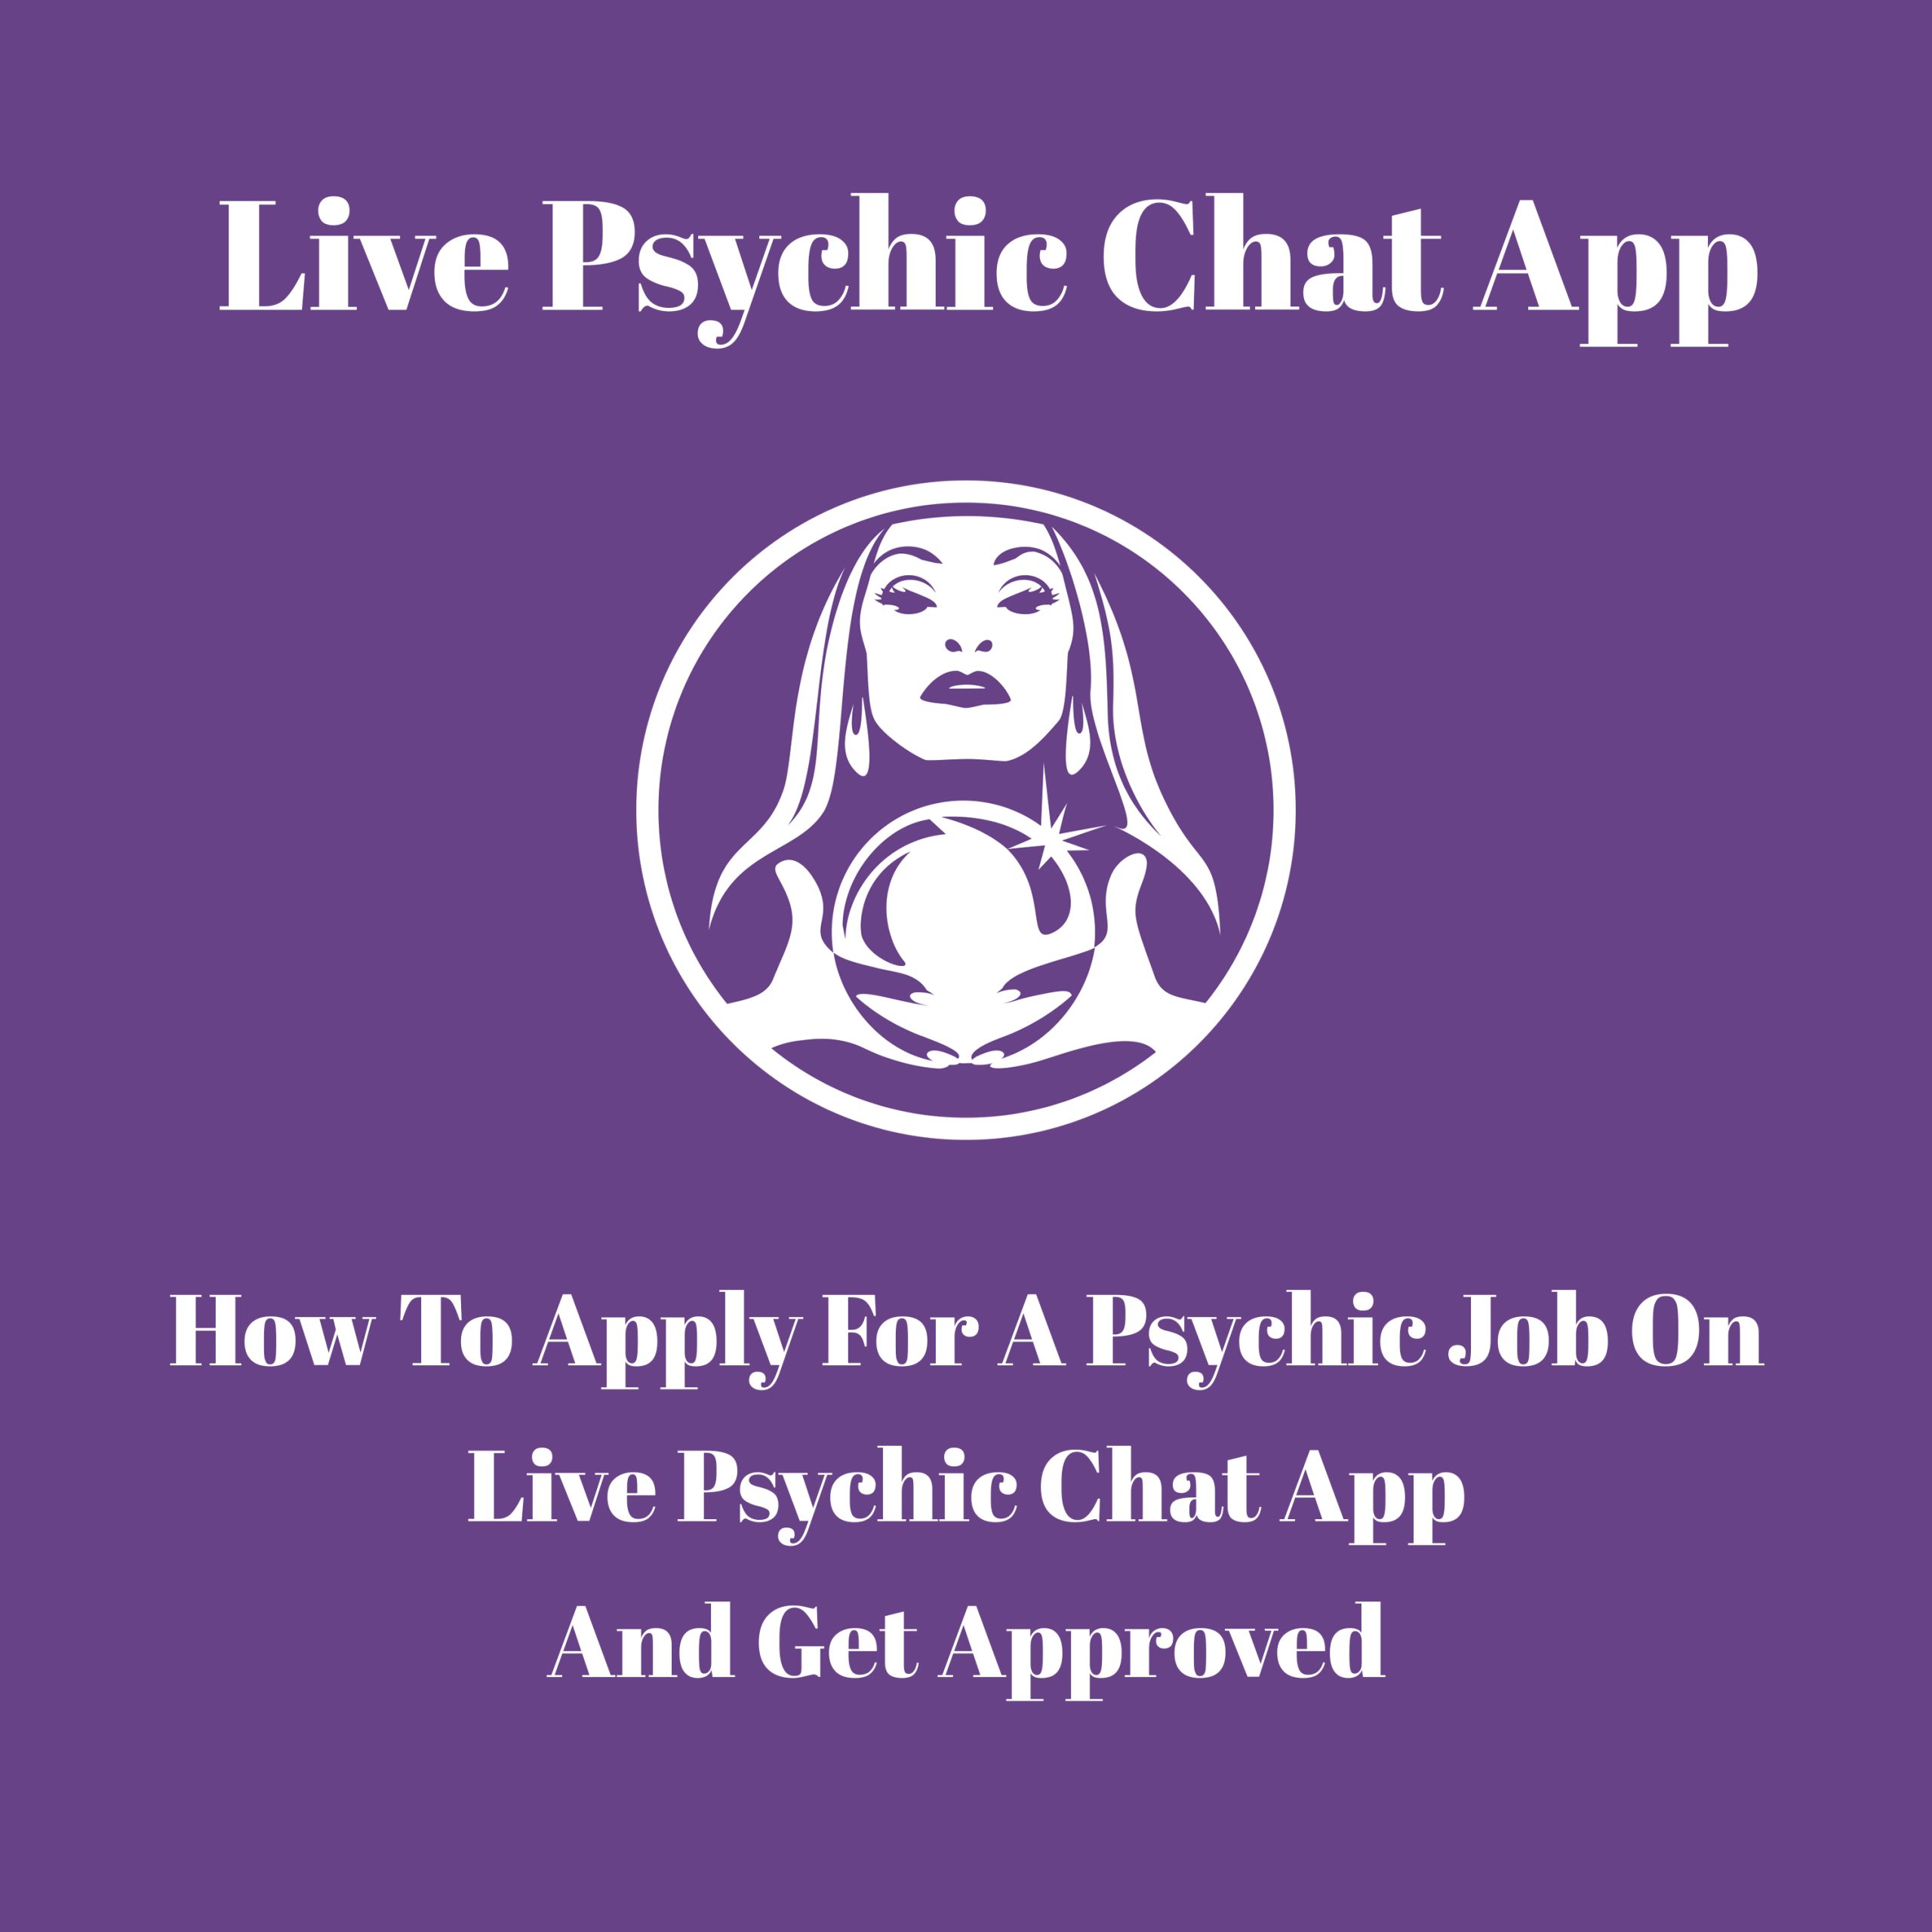 How To Apply For A Psychic Job On Live Psychic Chat App And Get Approved